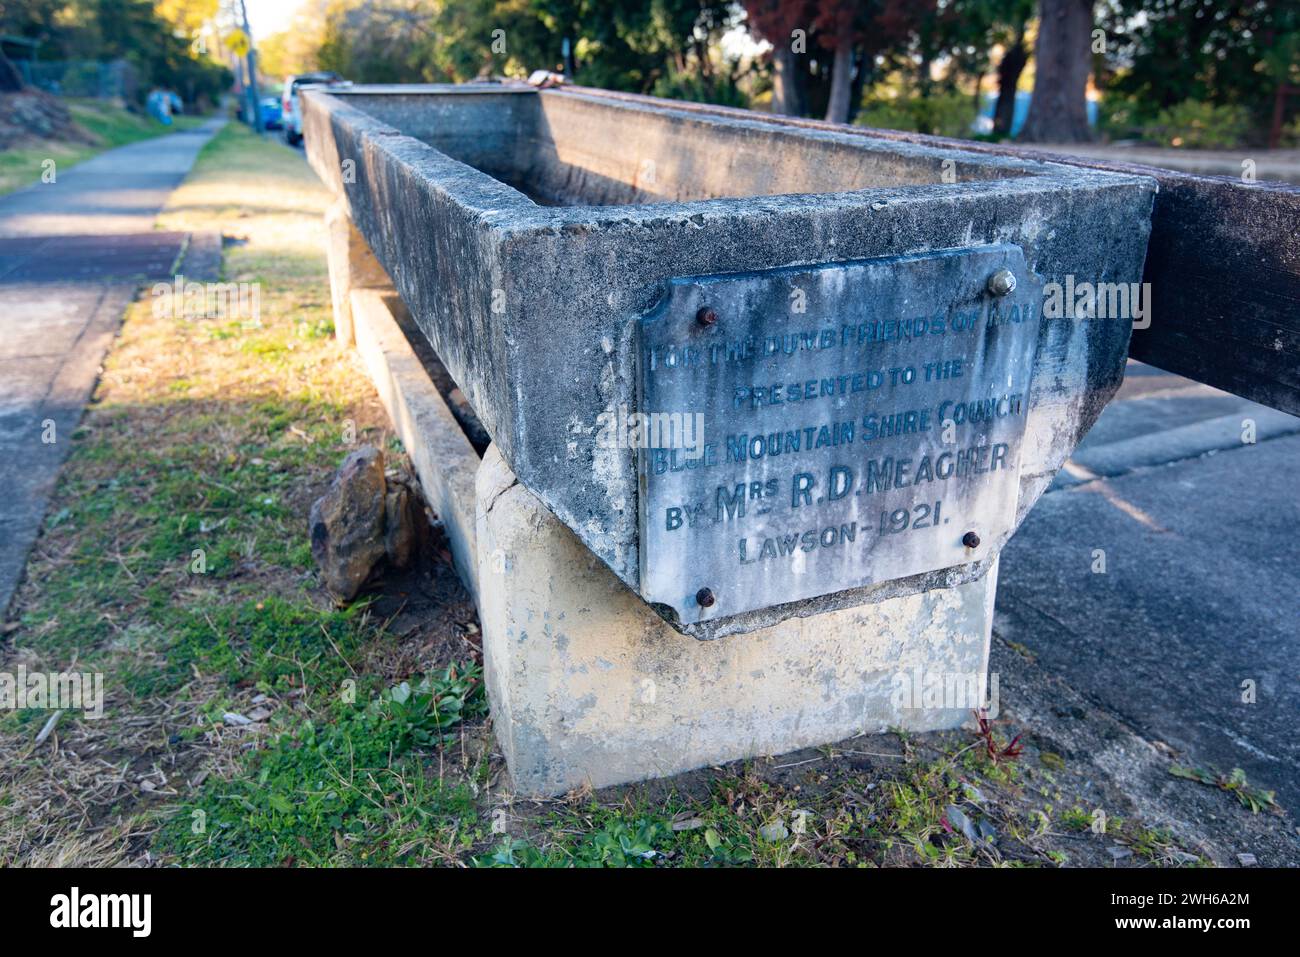 An antique horse water trough beside the road in the Blue Mountains town of Lawson, New South Wales, Australia. Donated in 1921 by Mrs R.D. Meagher Stock Photo